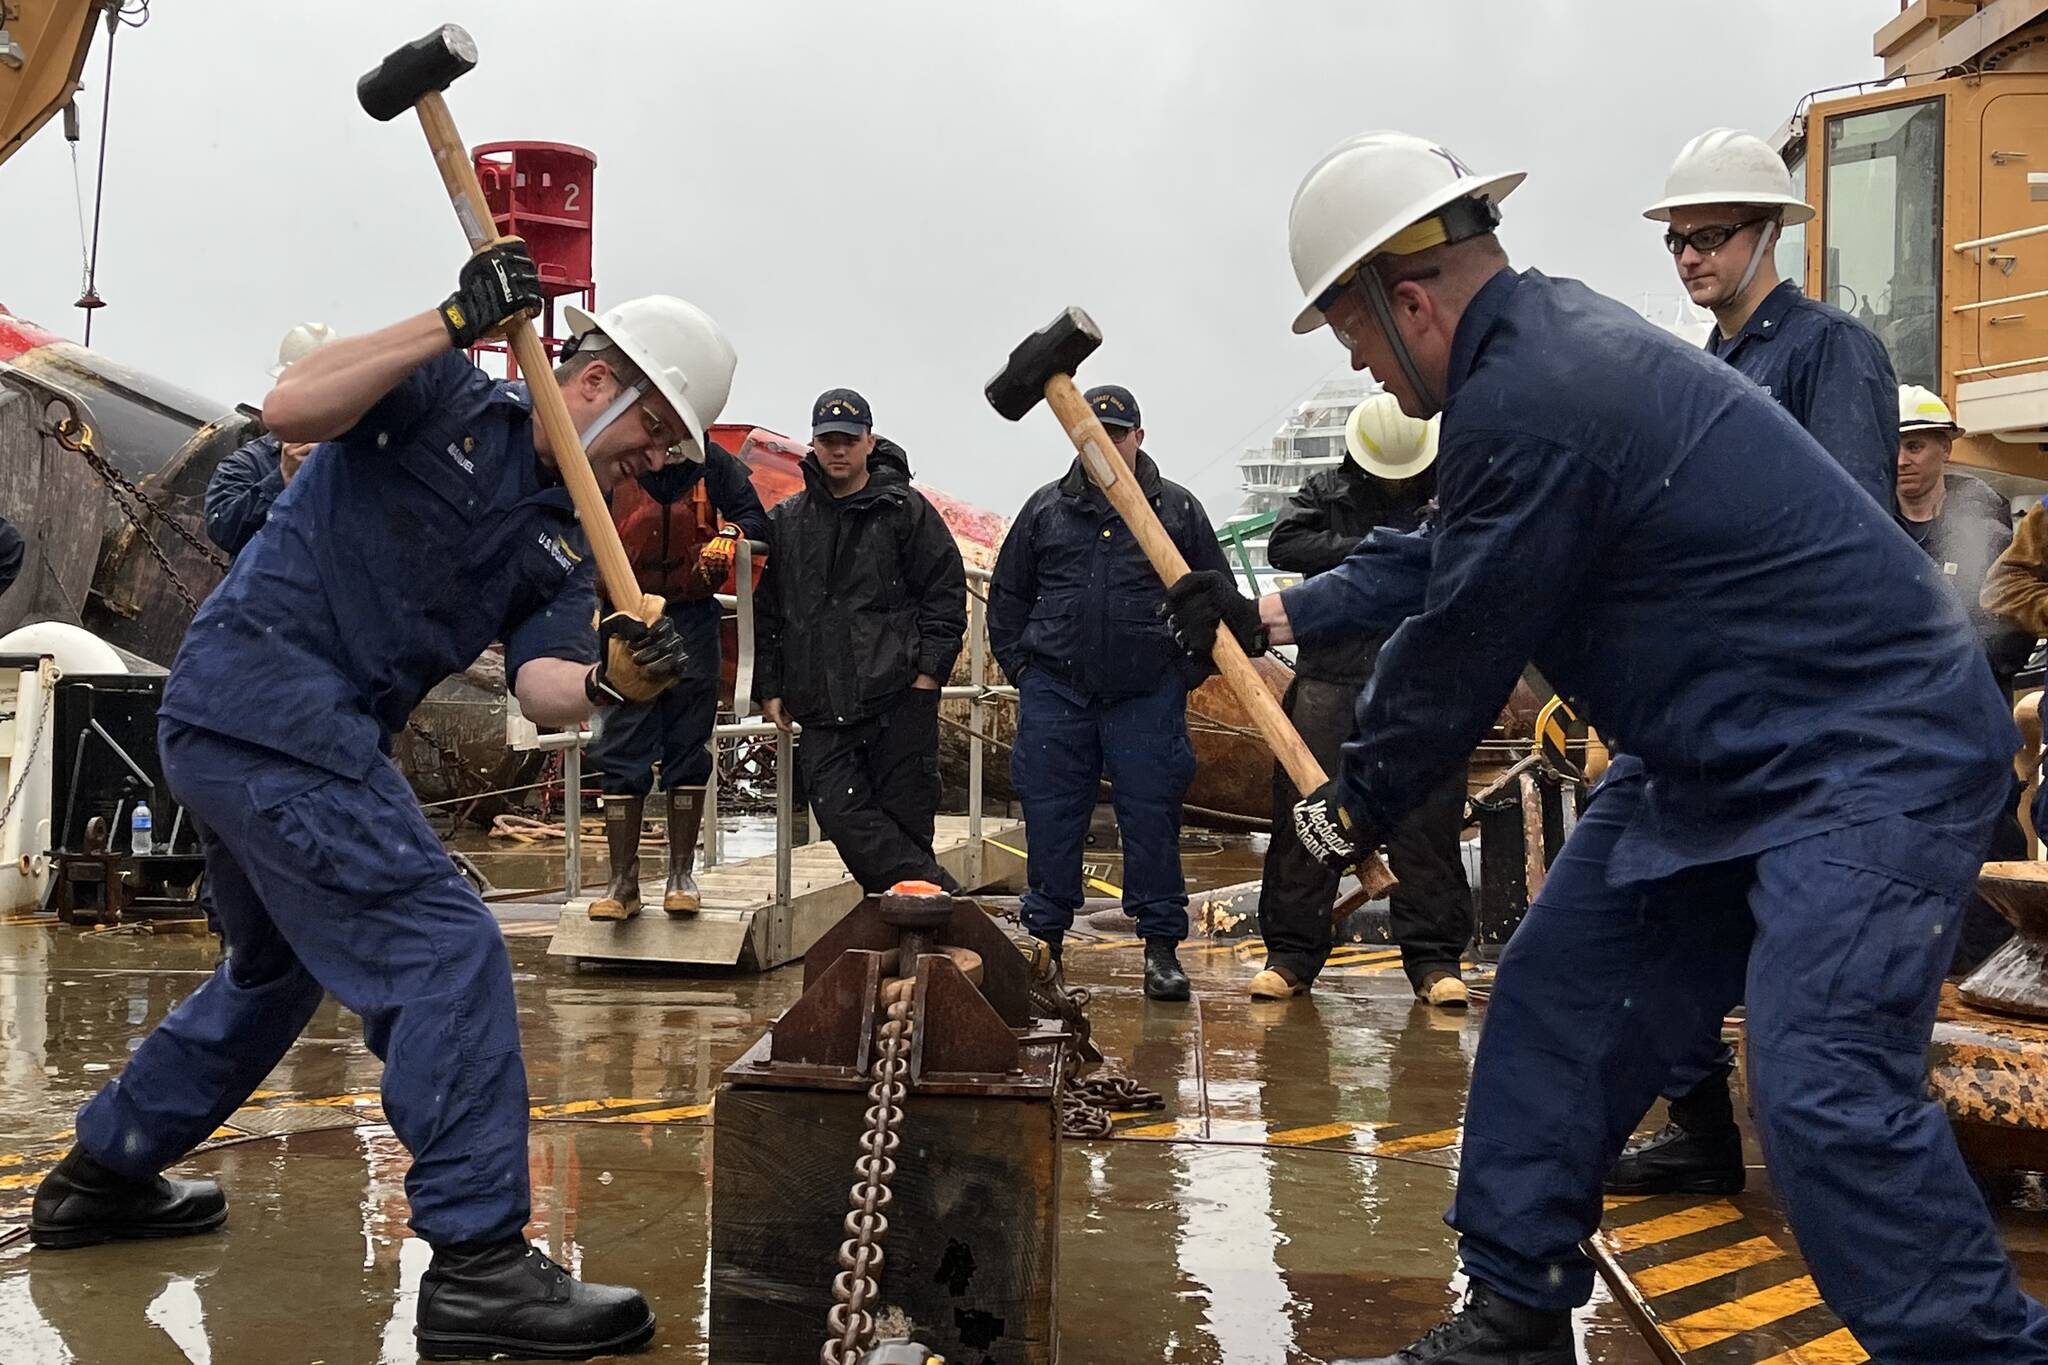 Heat and Beat featured in this photo is one of the events held in the Buoy Tender Olympics, which has teams smashing smoldering chains as a way of breaking off rusted ends and connecting new links with a pin. (Jonson Kuhn / Juneau Empire)